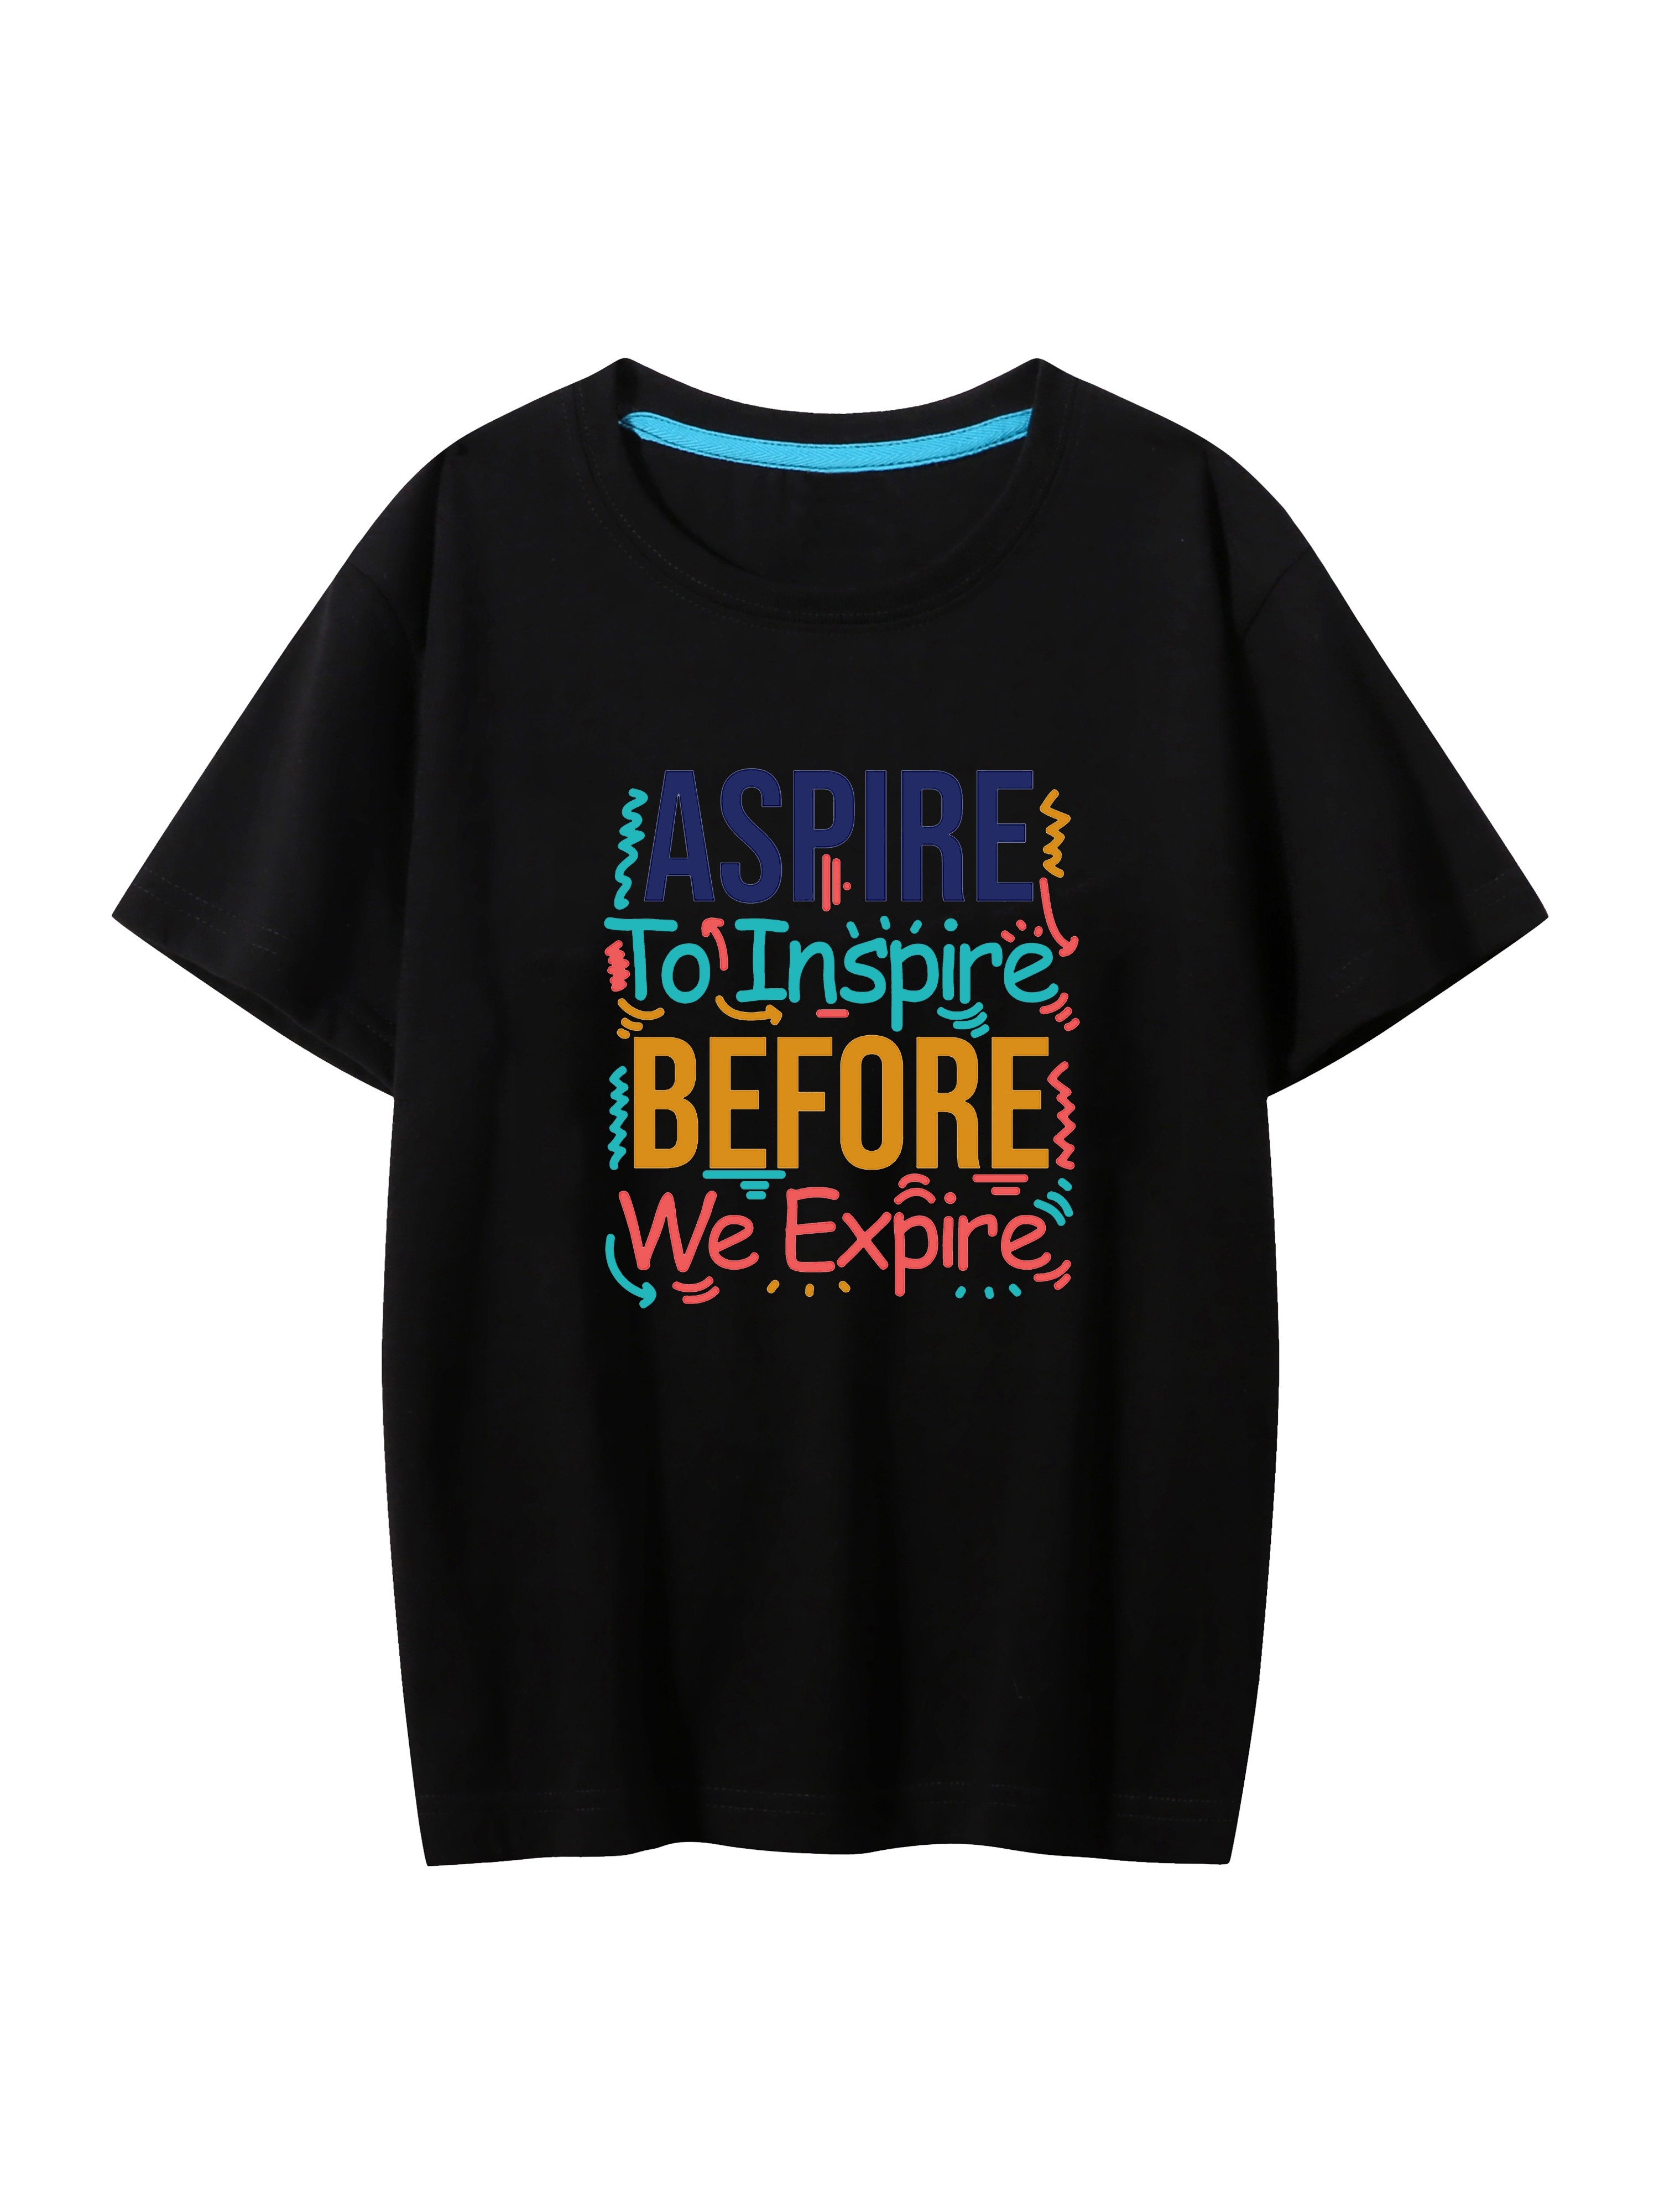 Aspire To Inspire Before We Expire T-Shirts for Sale